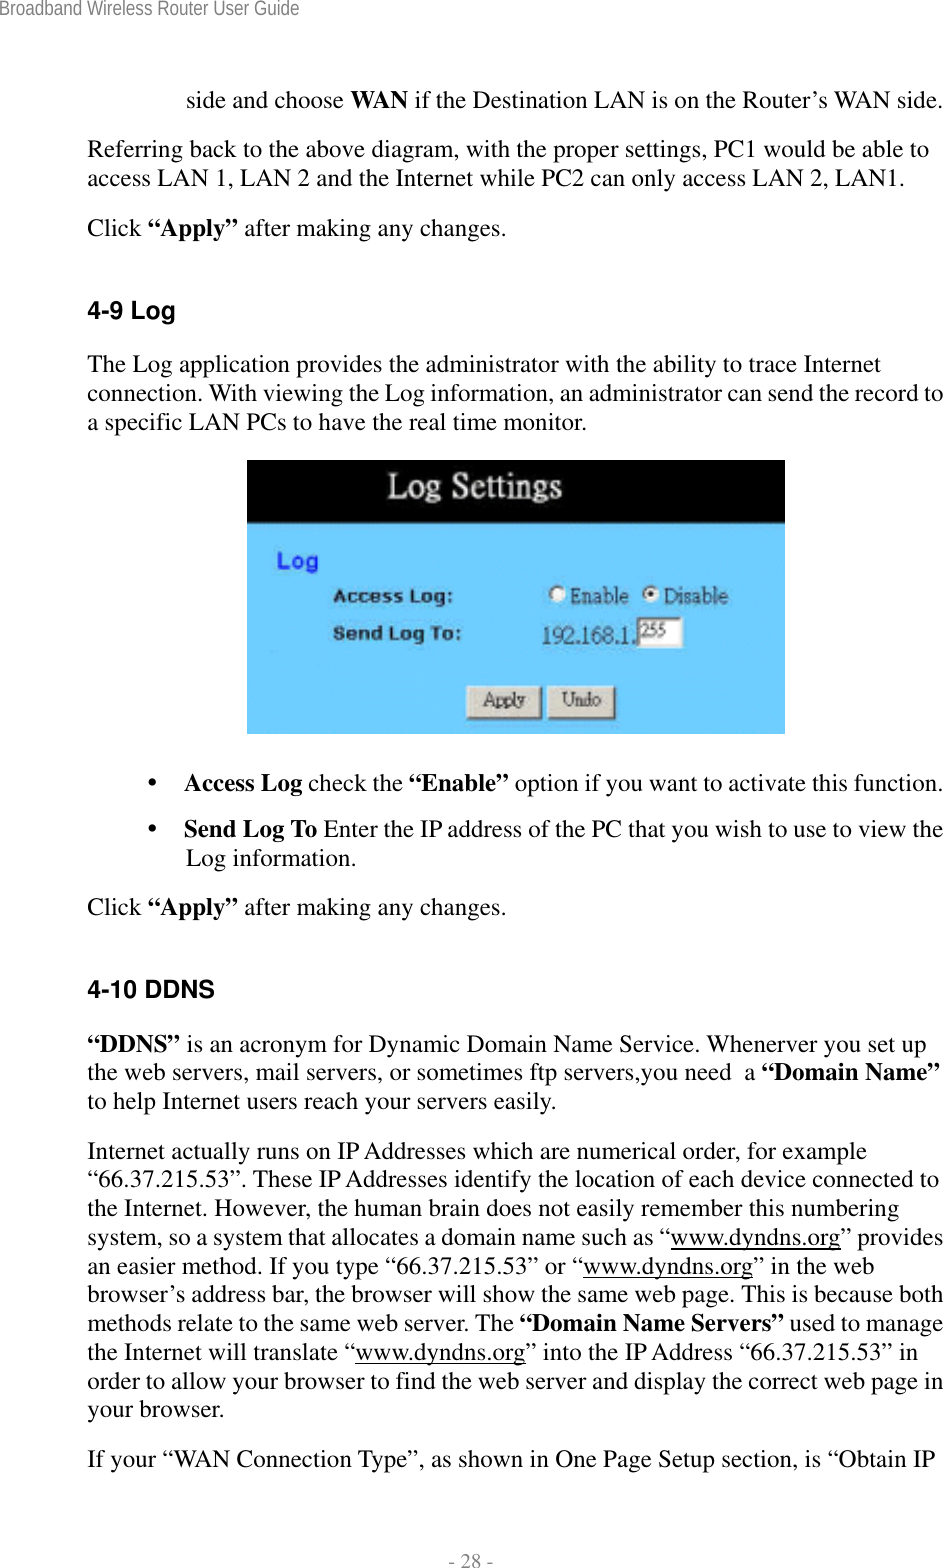 Broadband Wireless Router User Guide  - 28 - side and choose WAN if the Destination LAN is on the Router’s WAN side. Referring back to the above diagram, with the proper settings, PC1 would be able to access LAN 1, LAN 2 and the Internet while PC2 can only access LAN 2, LAN1. Click “Apply” after making any changes.  4-9 Log The Log application provides the administrator with the ability to trace Internet connection. With viewing the Log information, an administrator can send the record to a specific LAN PCs to have the real time monitor.    Access Log check the “Enable” option if you want to activate this function.  Send Log To Enter the IP address of the PC that you wish to use to view the Log information. Click “Apply” after making any changes.  4-10 DDNS  “DDNS” is an acronym for Dynamic Domain Name Service. Whenerver you set up the web servers, mail servers, or sometimes ftp servers,you need  a “Domain Name” to help Internet users reach your servers easily.  Internet actually runs on IP Addresses which are numerical order, for example “66.37.215.53”. These IP Addresses identify the location of each device connected to the Internet. However, the human brain does not easily remember this numbering system, so a system that allocates a domain name such as “www.dyndns.org” provides an easier method. If you type “66.37.215.53” or “www.dyndns.org” in the web browser’s address bar, the browser will show the same web page. This is because both methods relate to the same web server. The “Domain Name Servers” used to manage the Internet will translate “www.dyndns.org” into the IP Address “66.37.215.53” in order to allow your browser to find the web server and display the correct web page in your browser.   If your “WAN Connection Type”, as shown in One Page Setup section, is “Obtain IP 